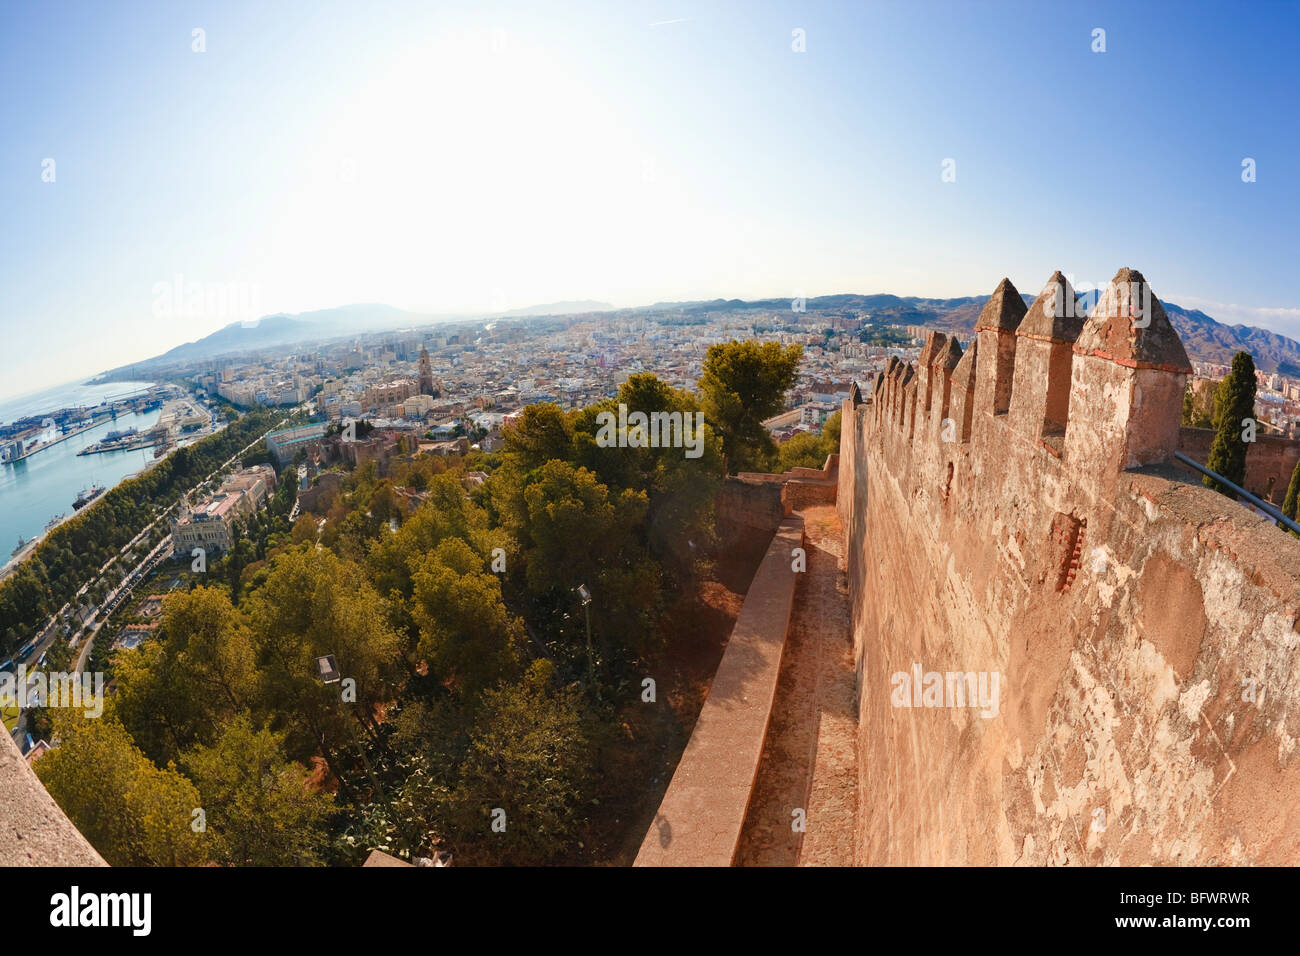 Malaga, Costa del Sol, Spain. Walls and battlements of the Gibralfaro Castle with port and city background. Stock Photo